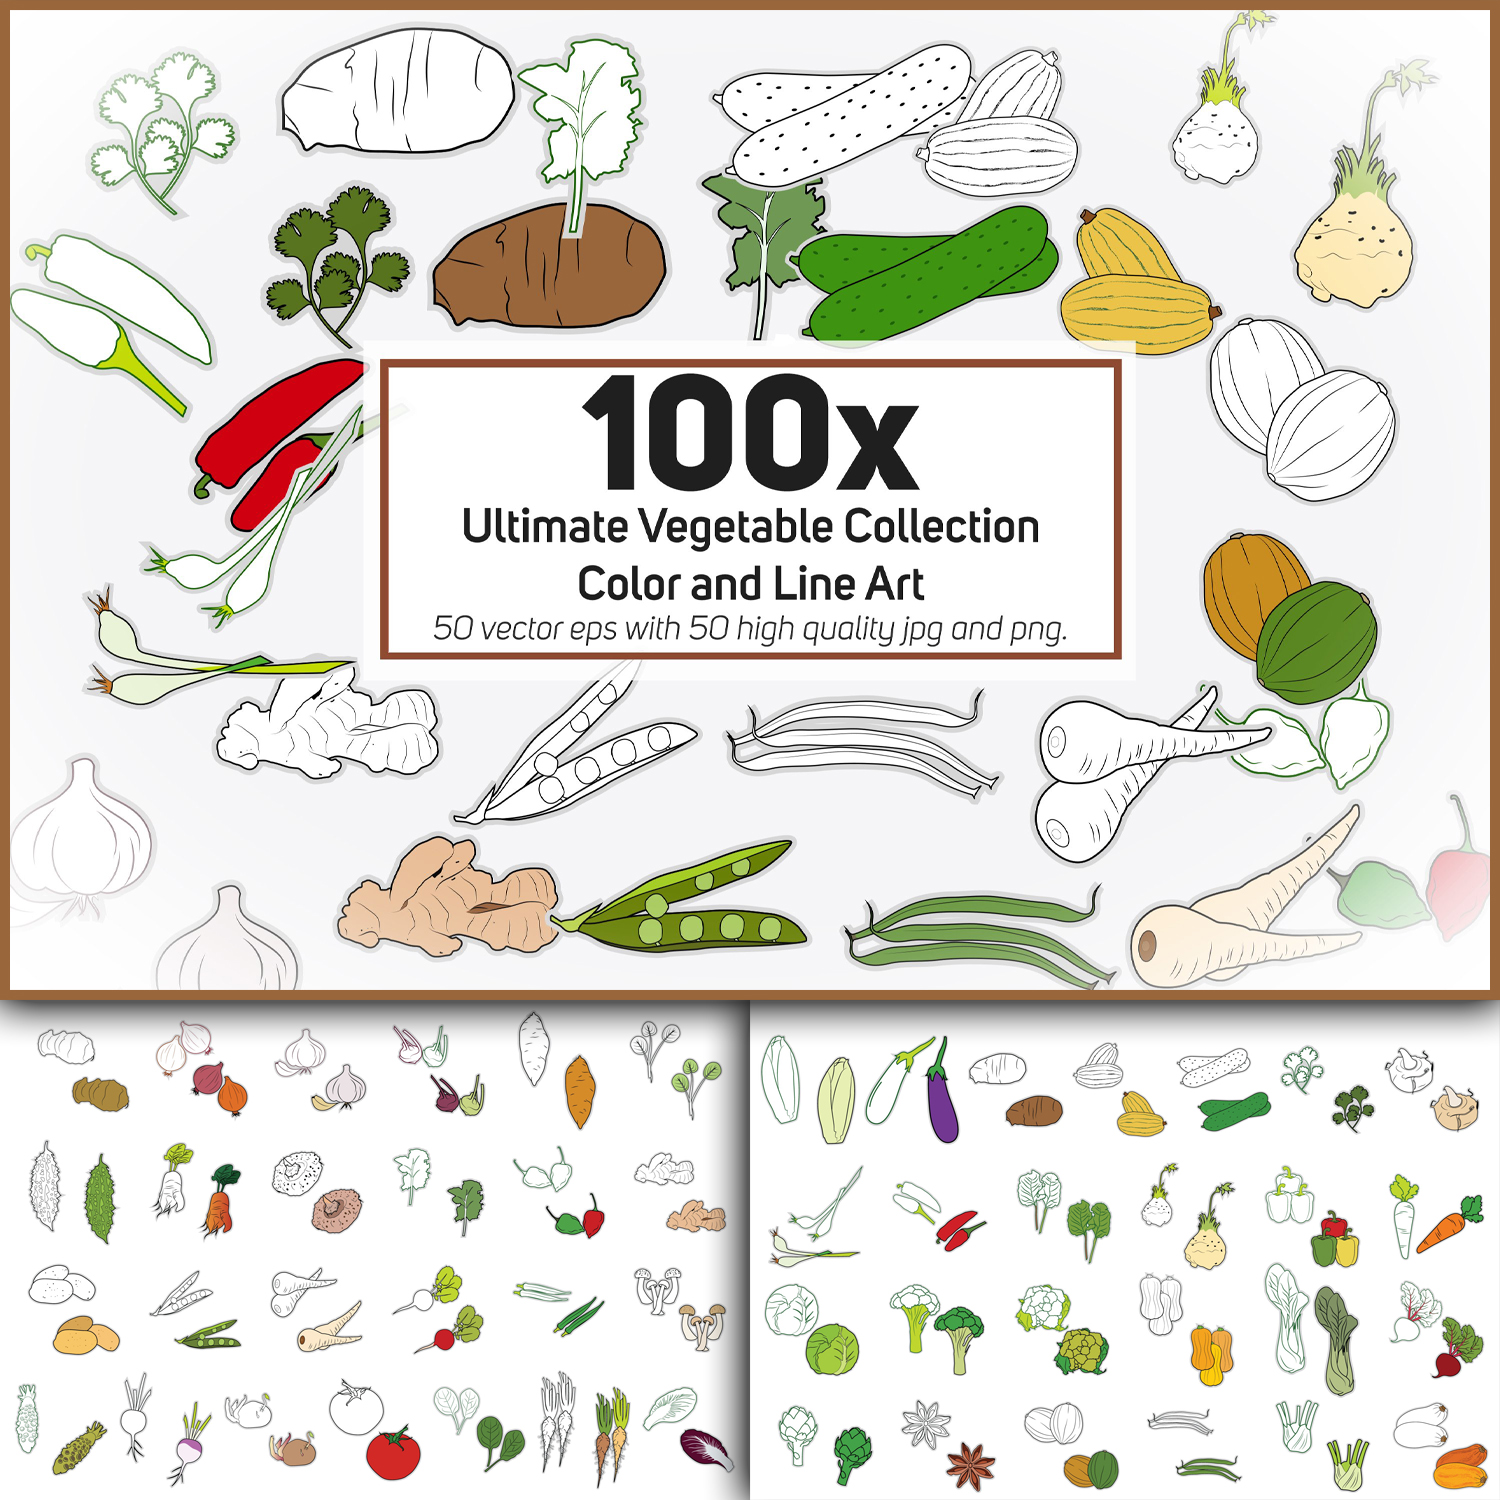 100x Ultimate Vegetable Collection - Color and Line Art cover.